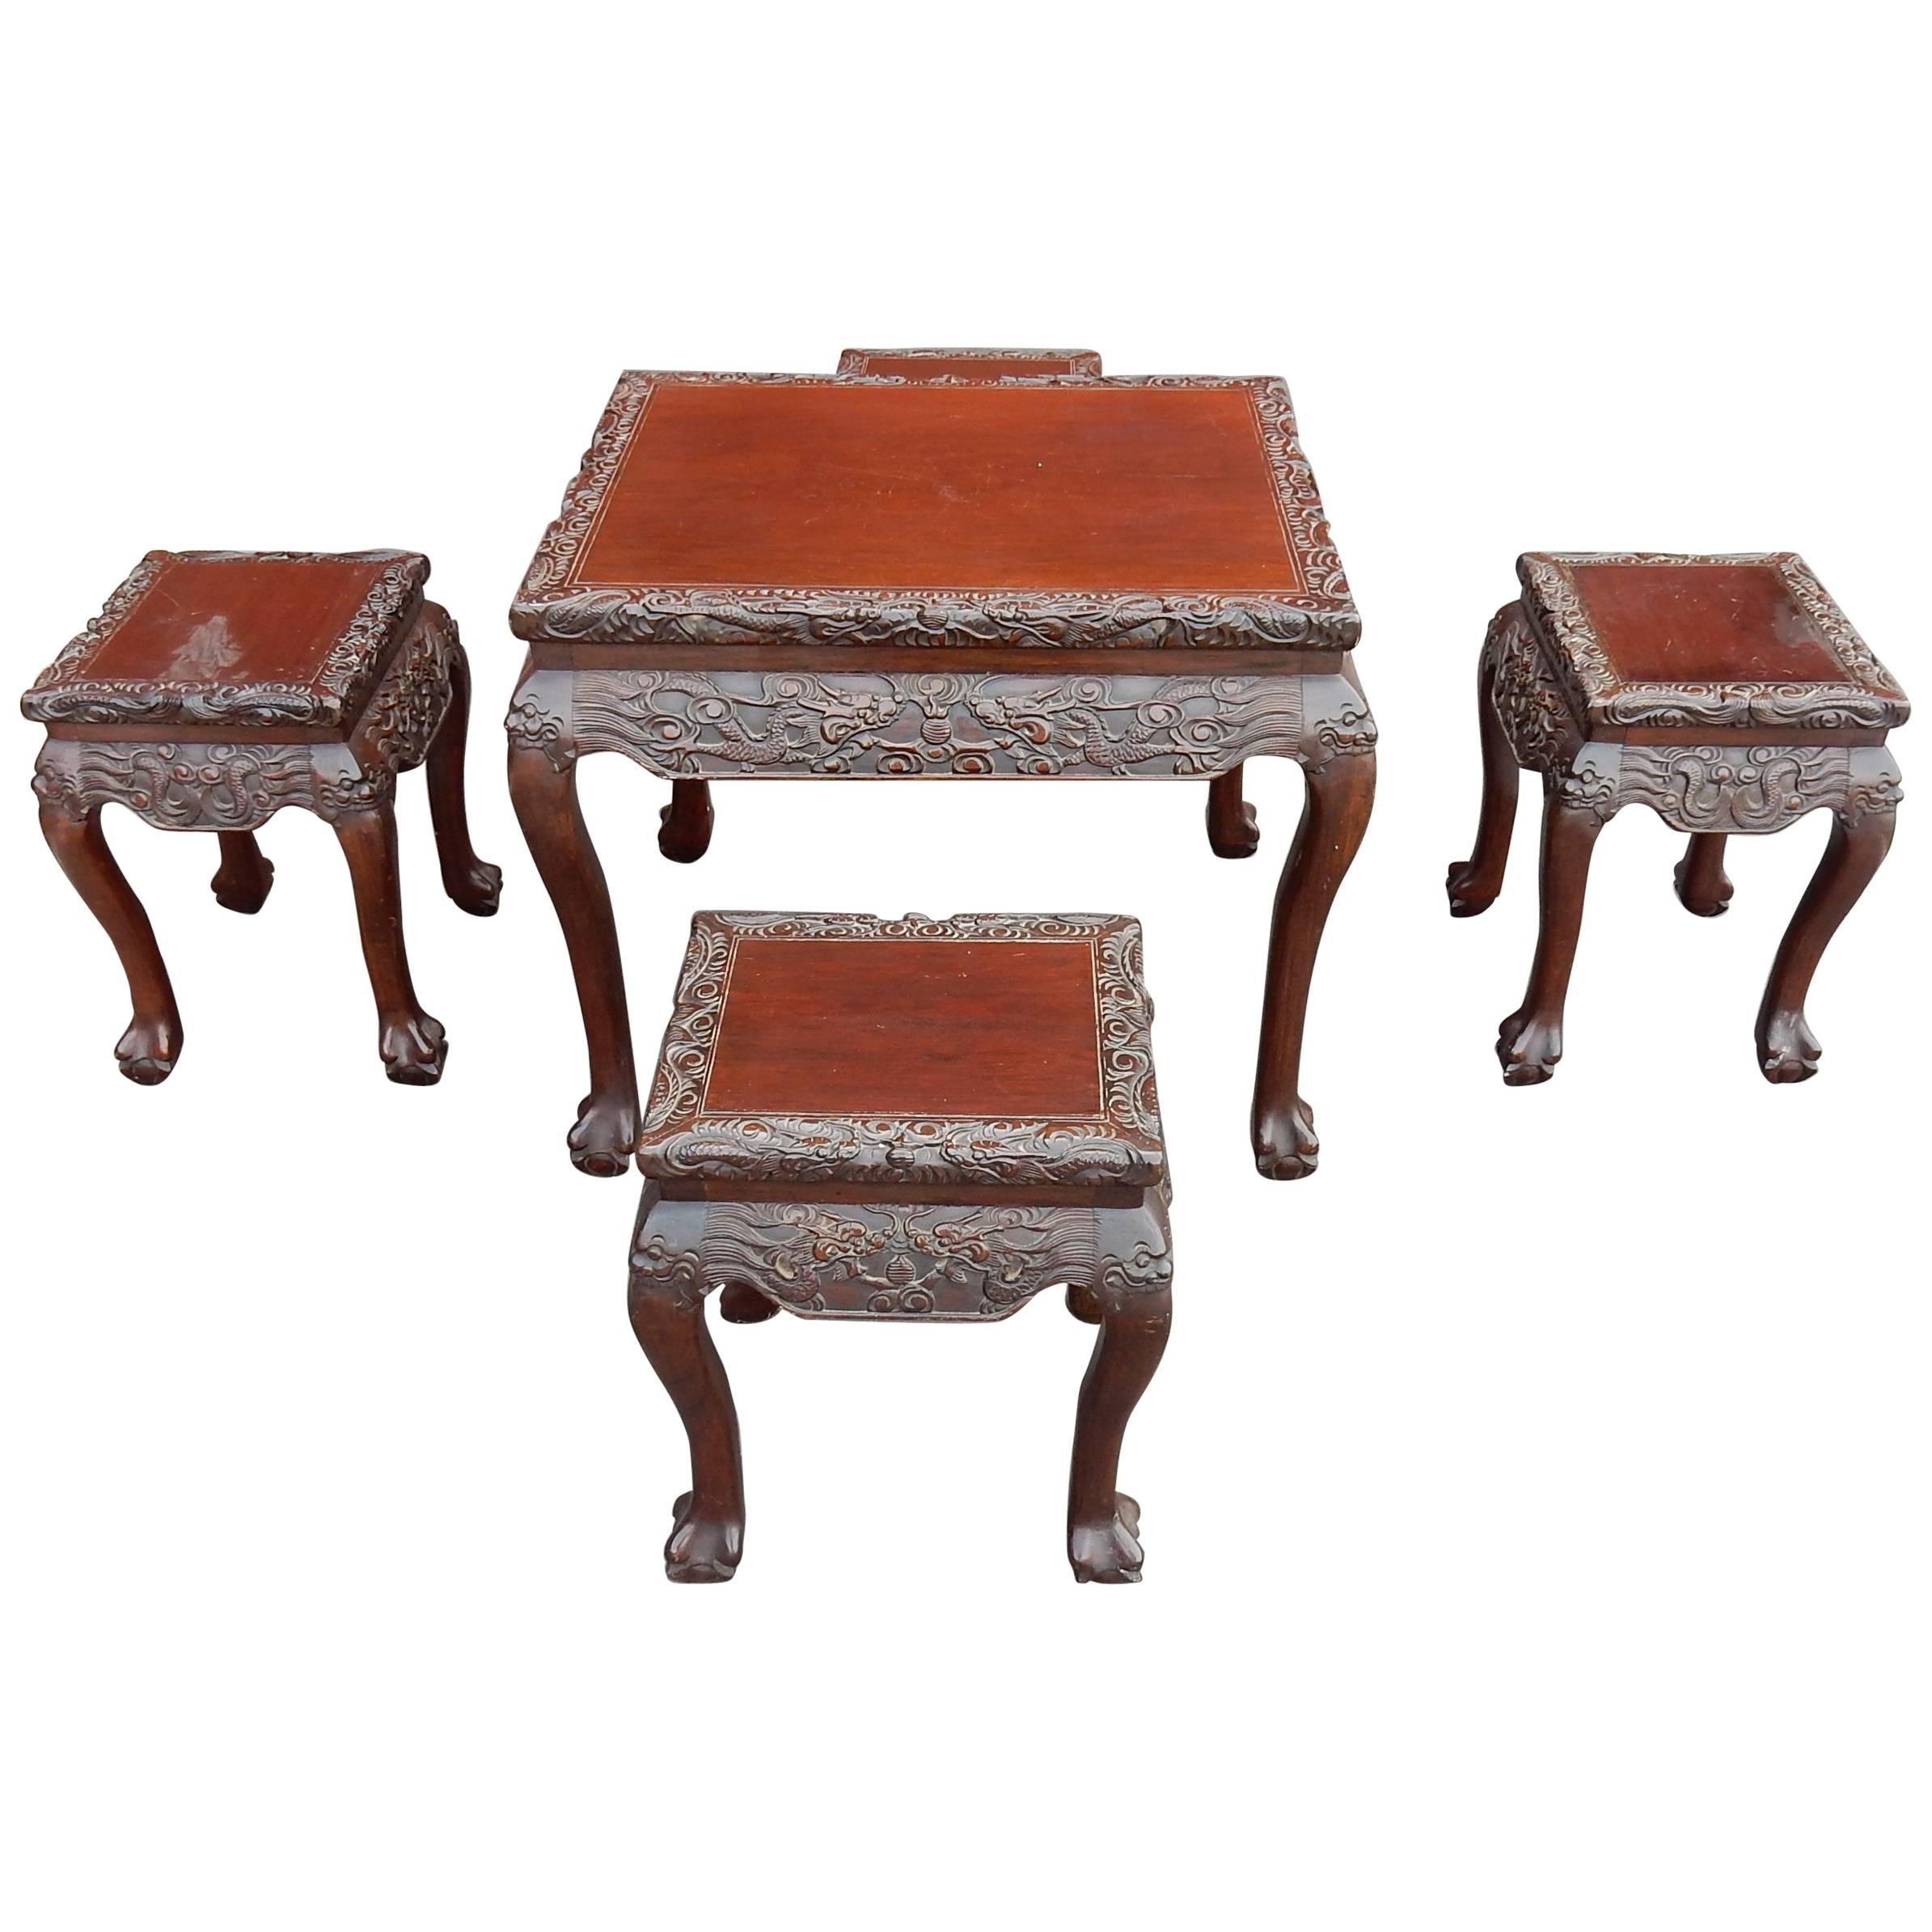 1920-1950 Play Table Mahjong China and Its Four Stools Palissandre